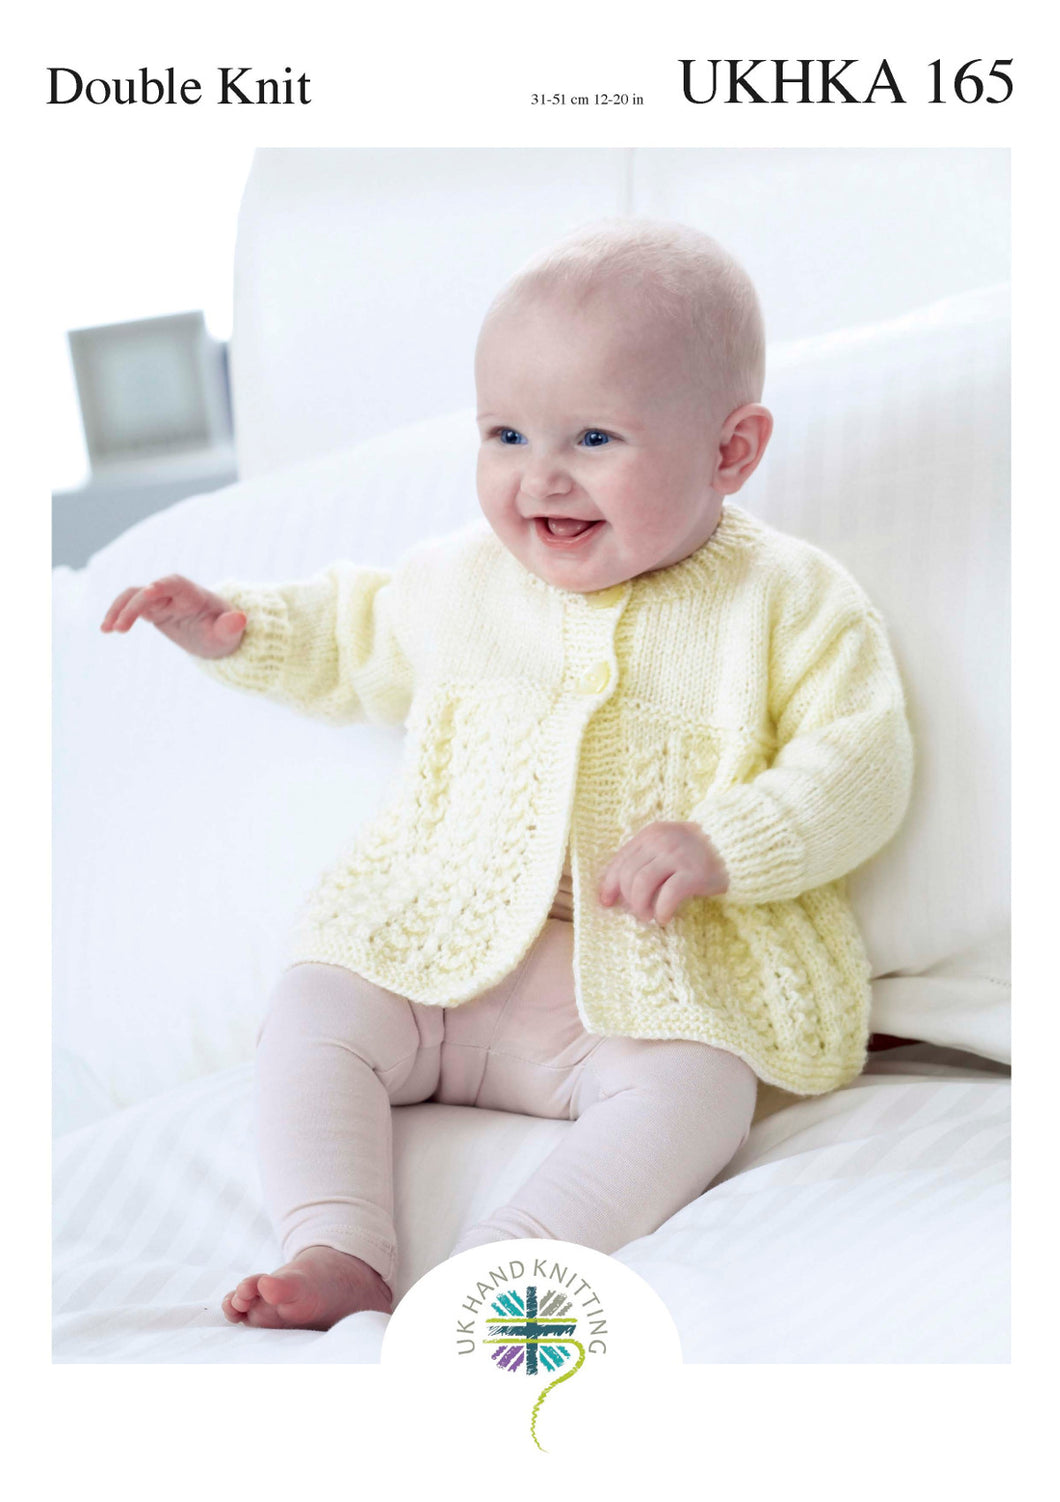 Double Knitting Pattern for Baby's Cardigans & Matinee Coat (UKHKA 165)